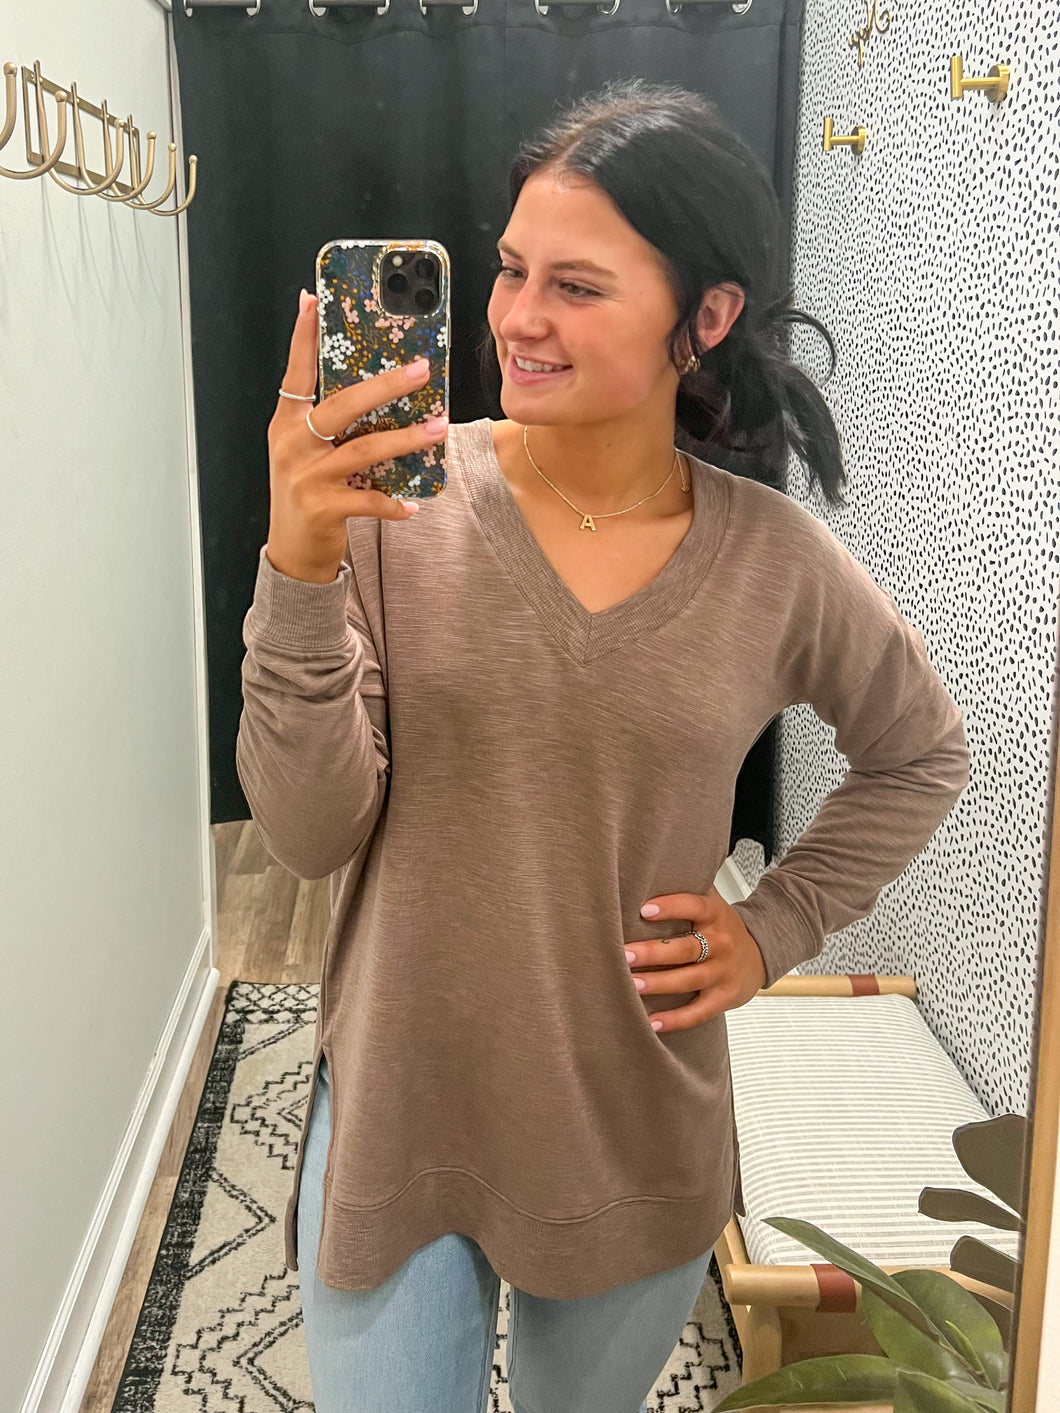 THE SCARLETT V NECK TUNIC TOP - tavern taupe